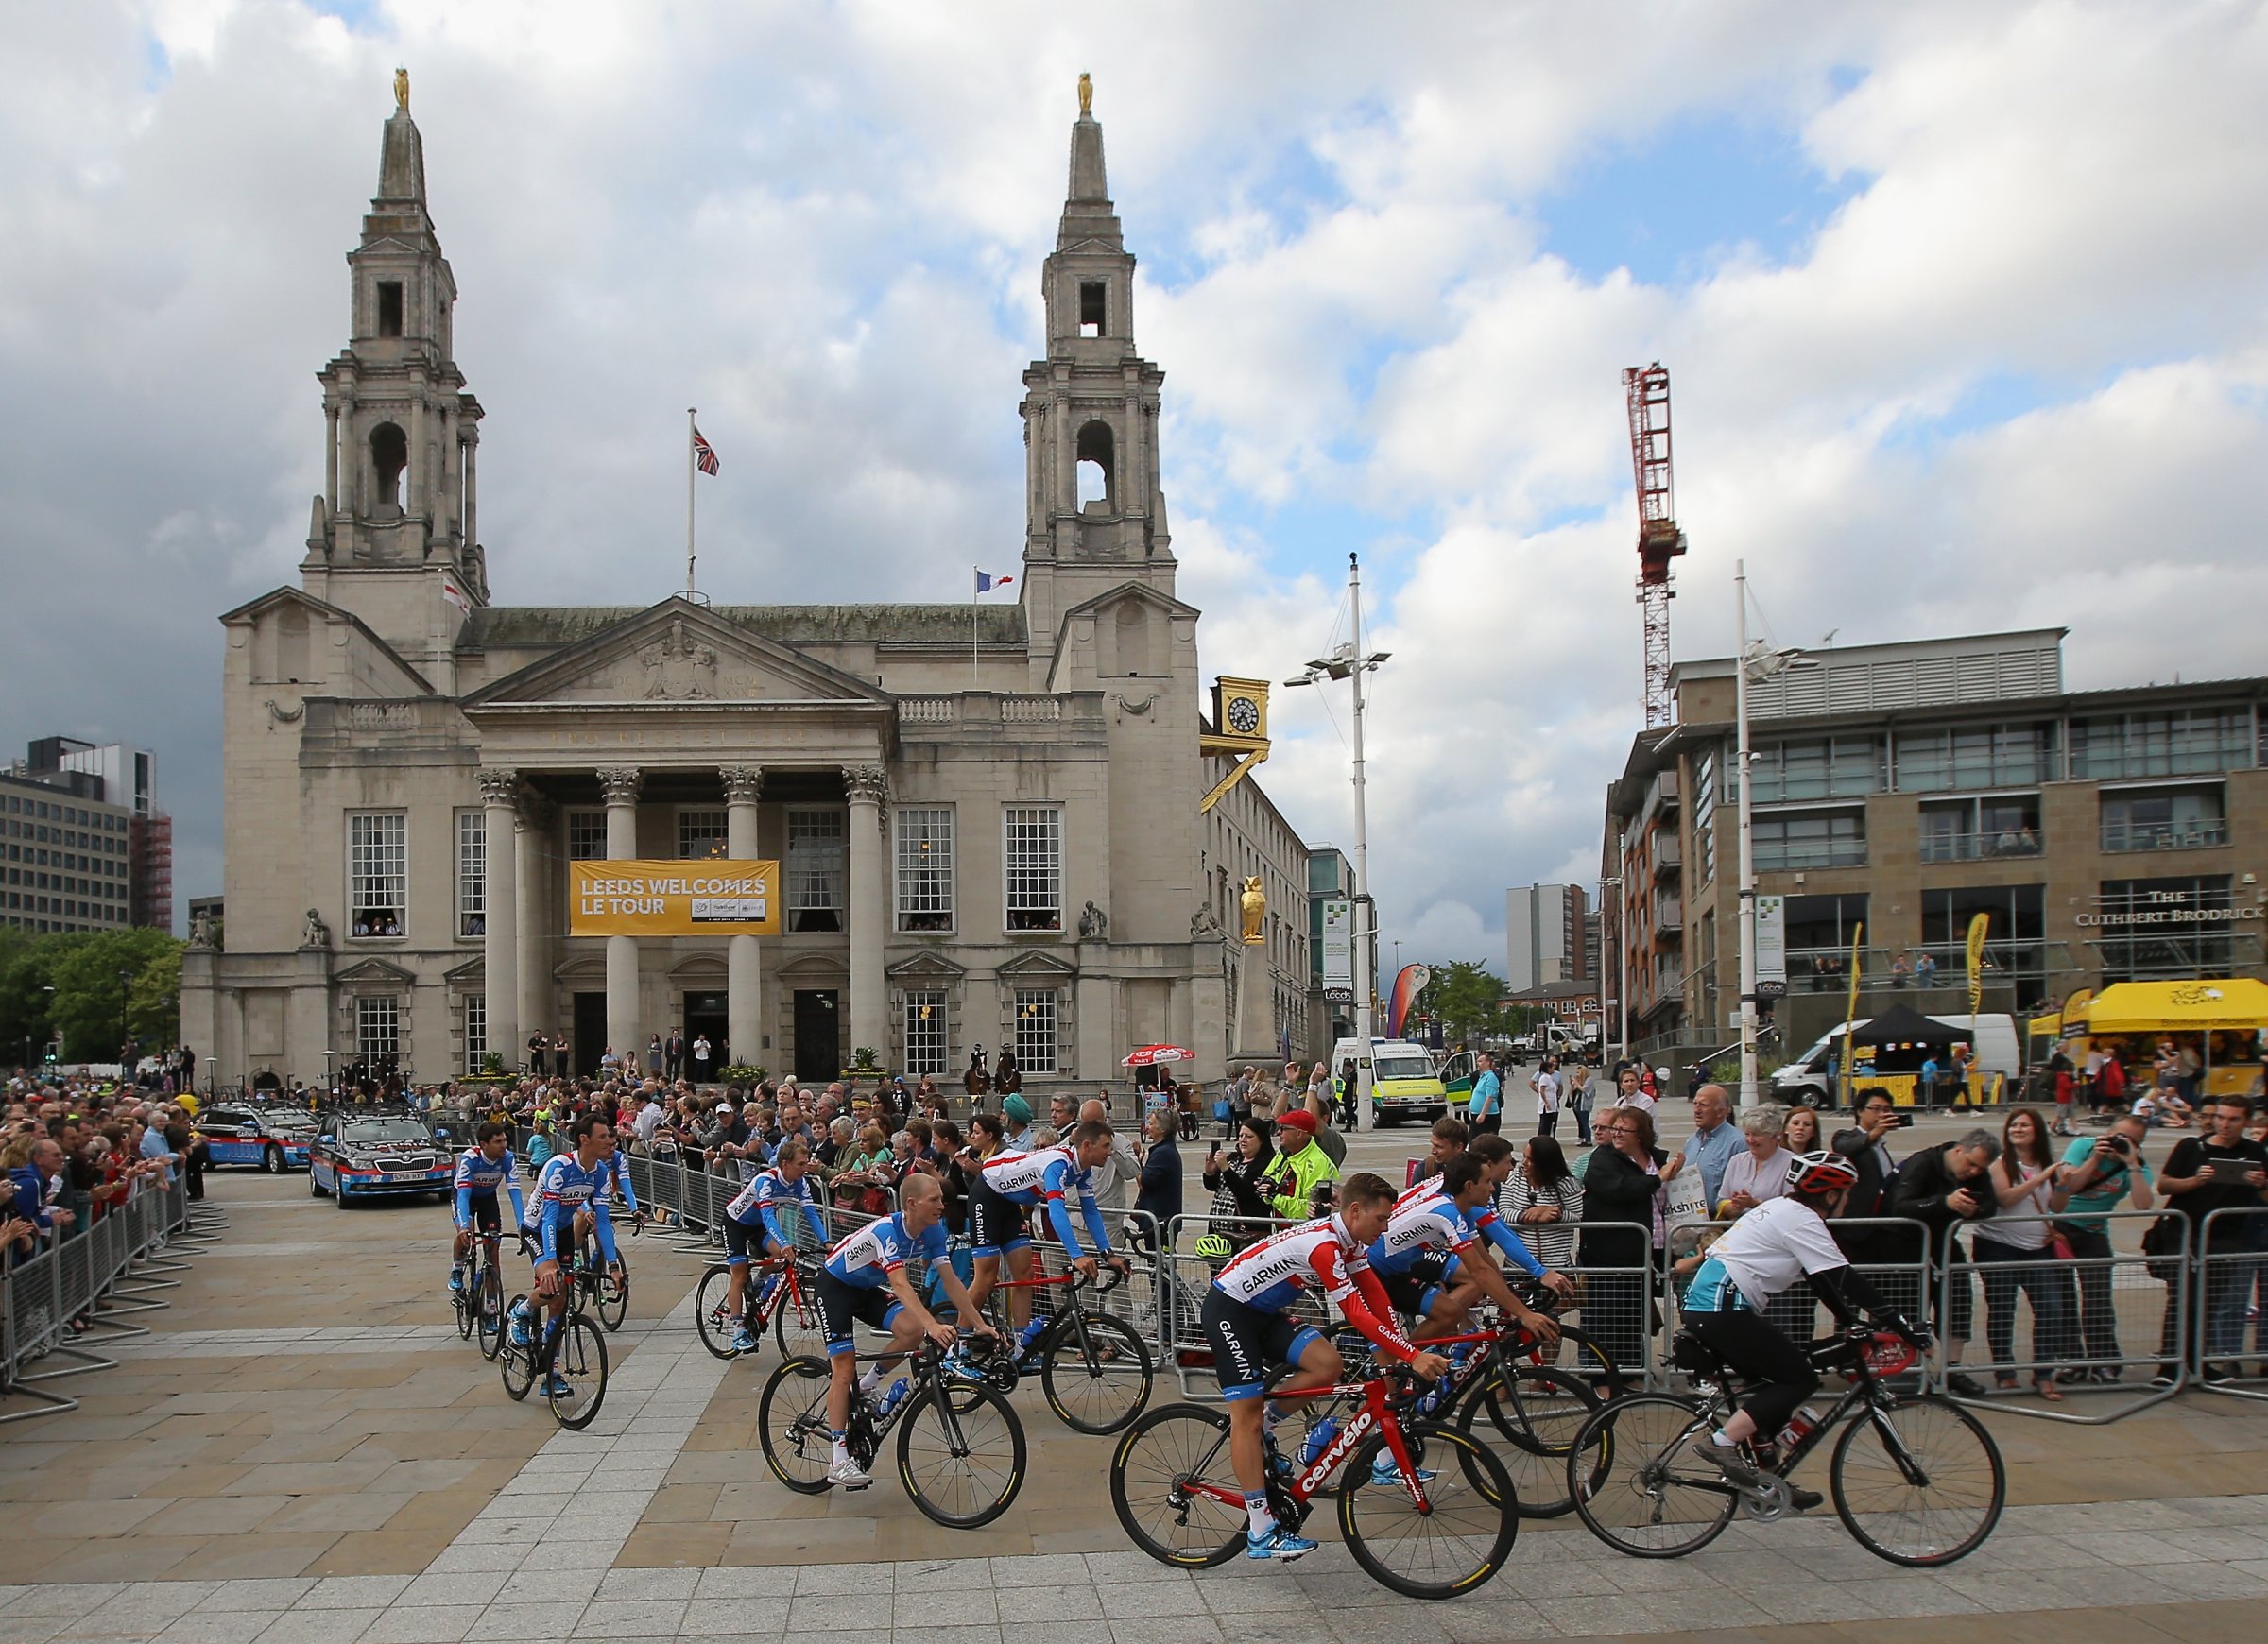 Team Garmin-Sharp is greeted by supporters as they ride through Millenium Square enroute to the Team Presentation prior to the 2014 Le Tour de France on July 3, 2014 in Leeds, United Kingdom.